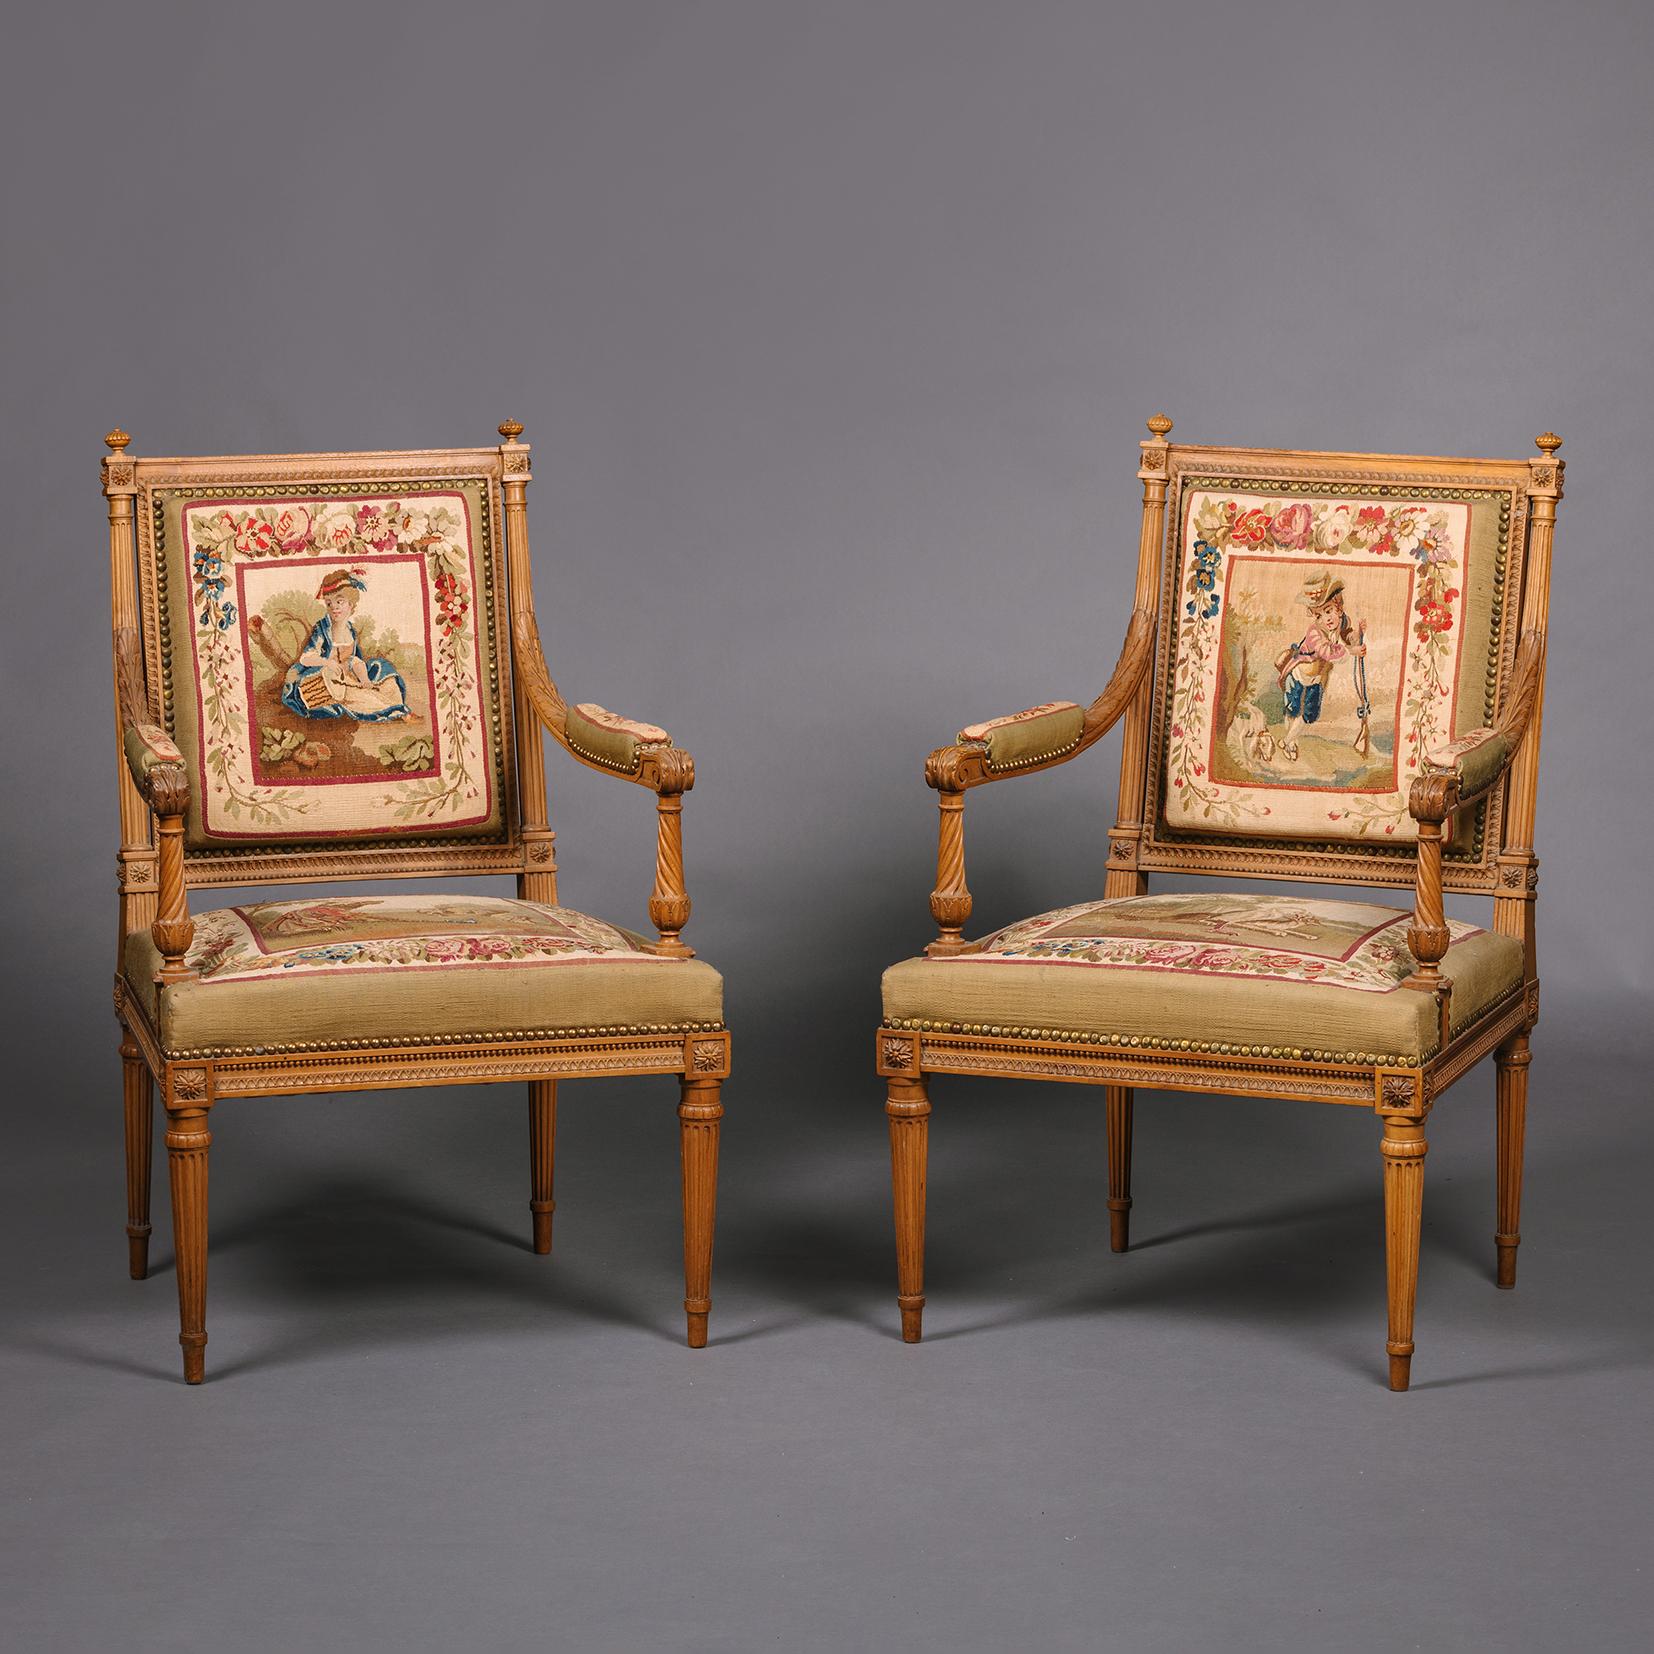 A Louis XVI Style Beechwood and Aubusson Tapestry Five-piece Salon Suite.

Comprising a canapé and four fauteuils, the beechwood frames crisply carved with beading, stylised petals and acanthus leaves, on turned and fluted supports, upholstered in